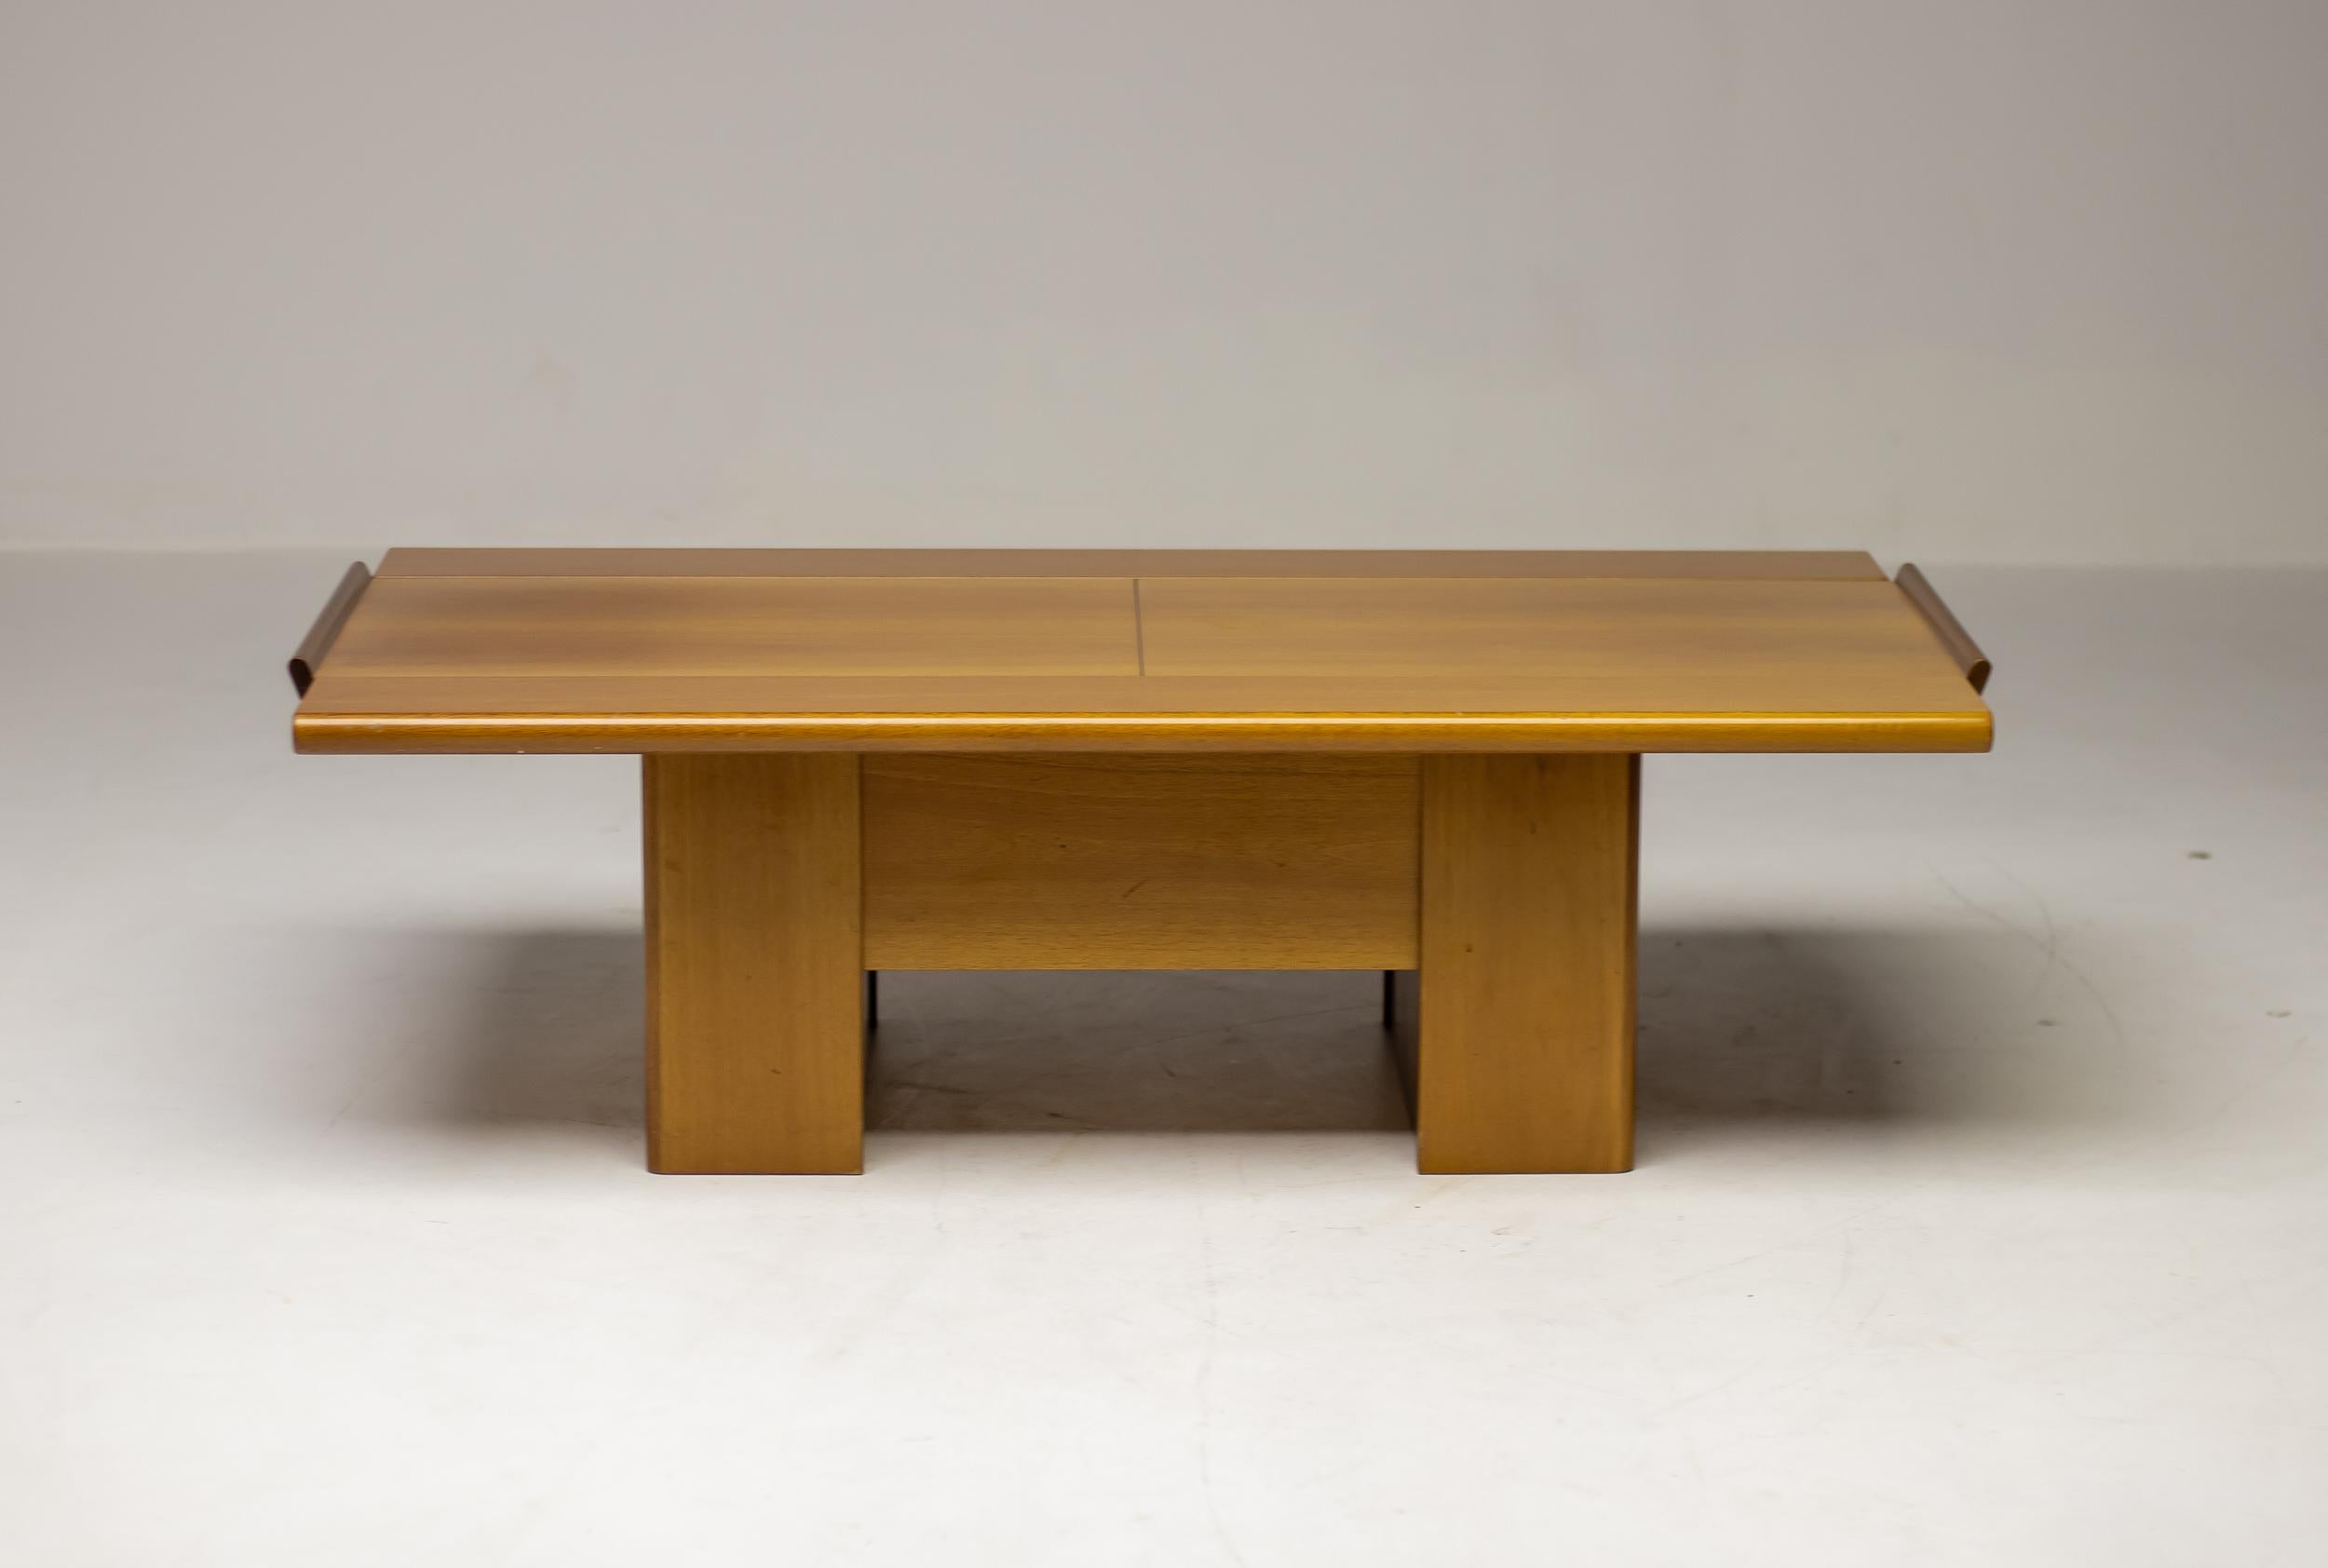 Monumental Italian coffee table in cherry wood with a sliding top concealing a storage space for bottles and glasses. The design resembles the architectural qualities of the Frank Lloyd Wright currently in the collection of Cassina, Italy.